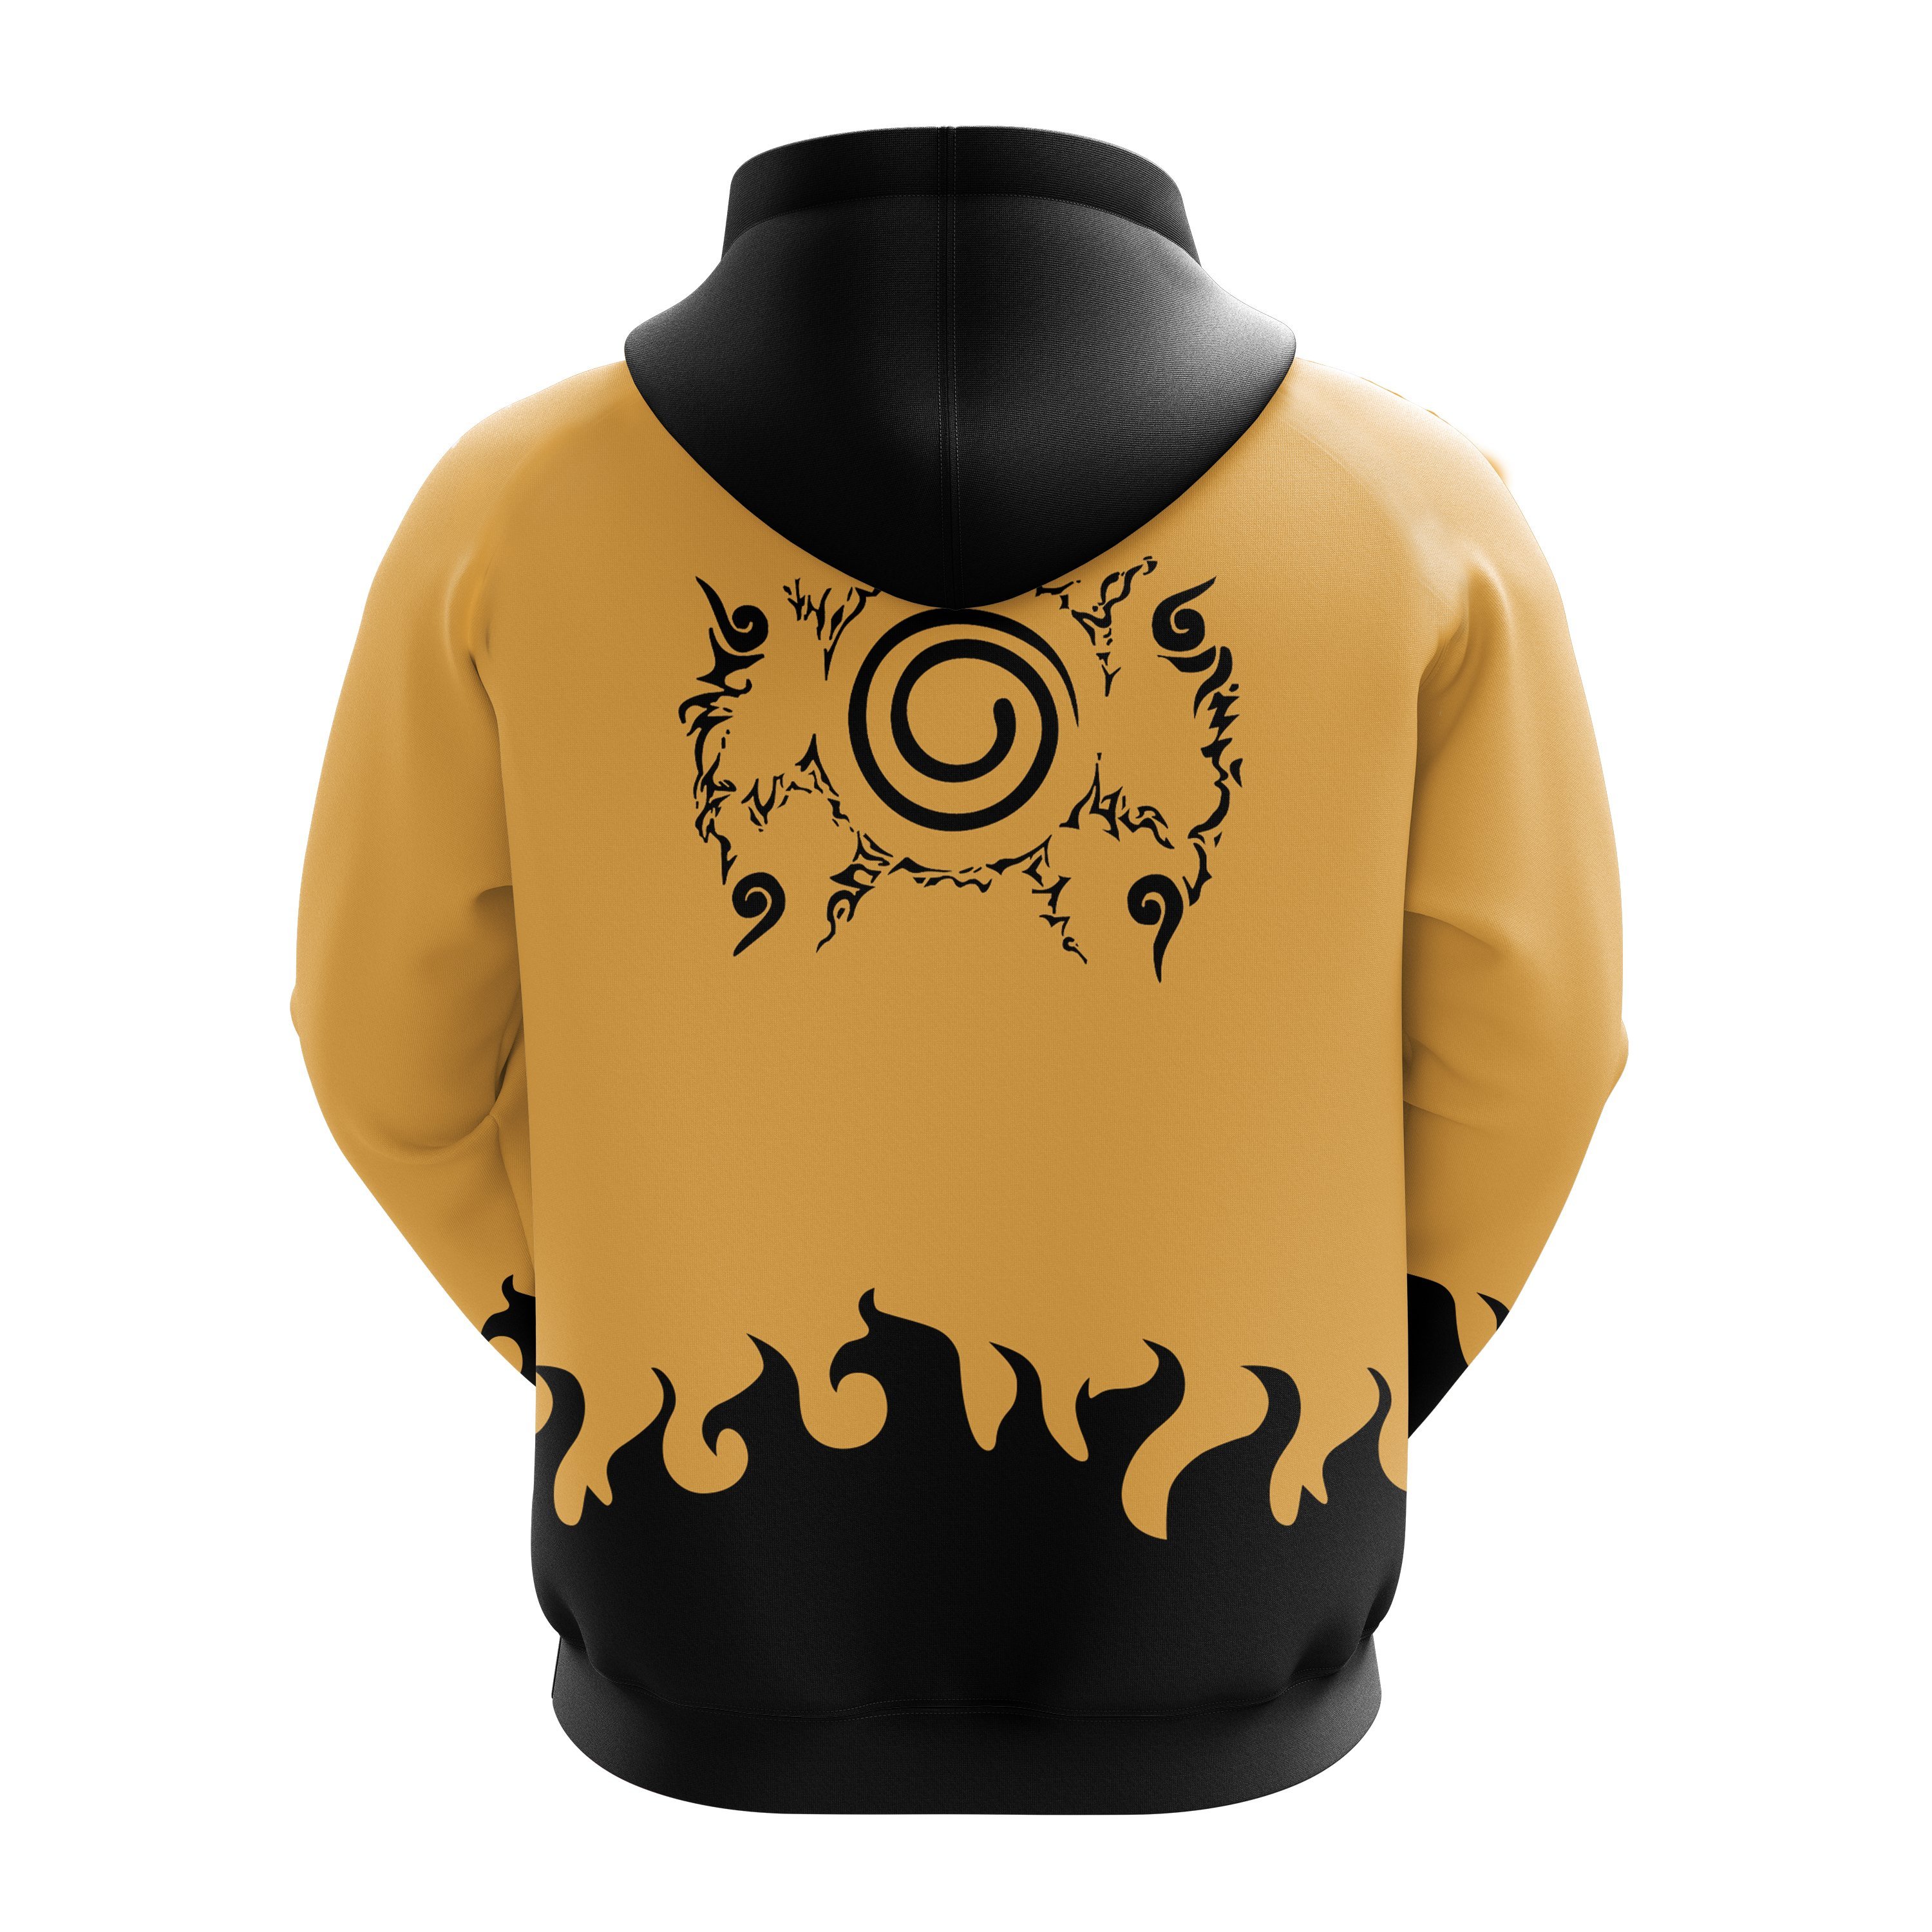 Naruto Outfit Cosplay Yellow Anime Hoodie Amazing Gift Idea - Betiti Store